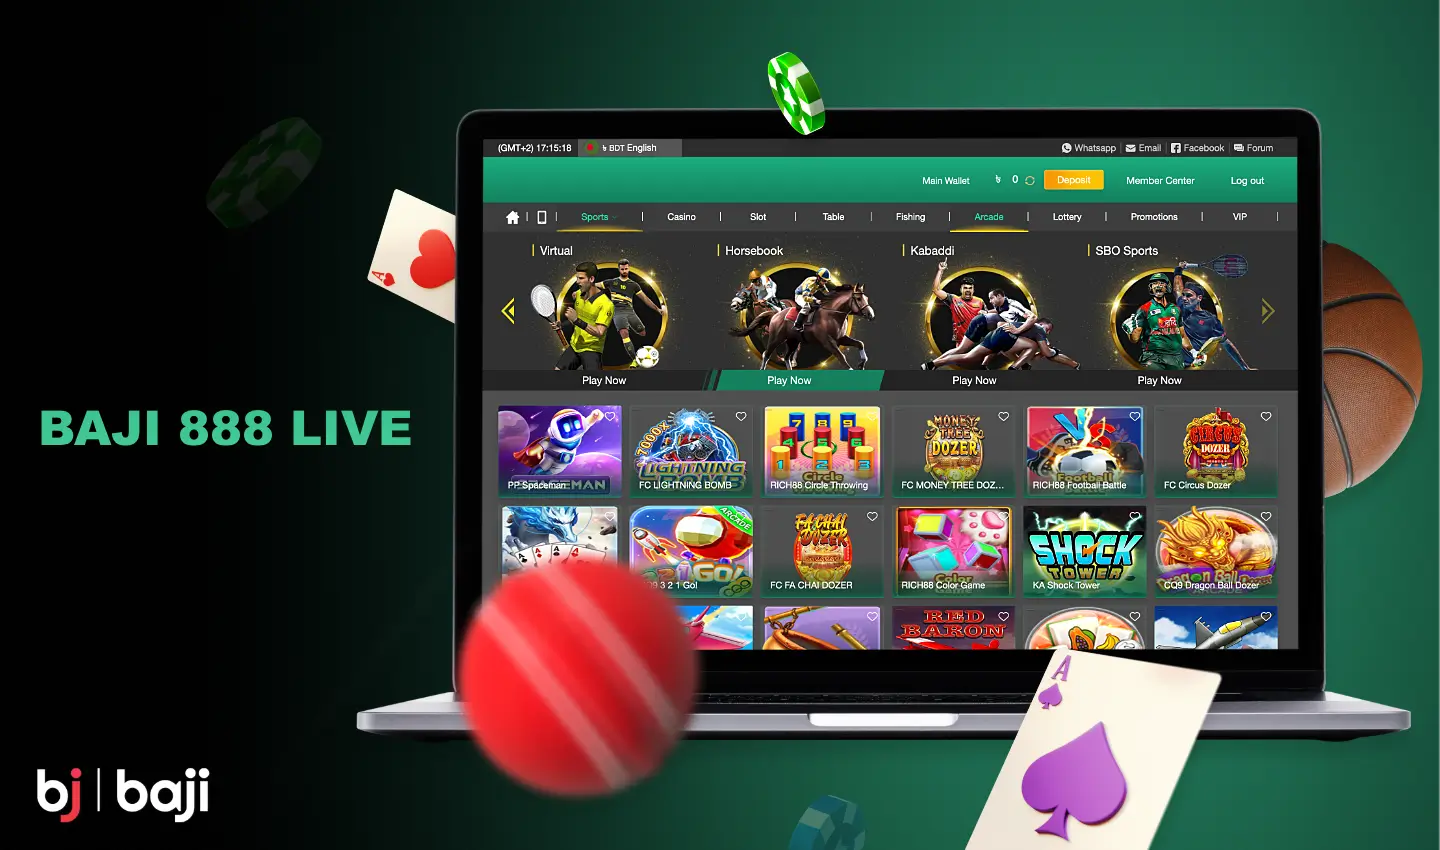 The Baji 888 Live website offers Bangladeshi users hundreds of gambling entertainment options, including casino games, sports betting and more